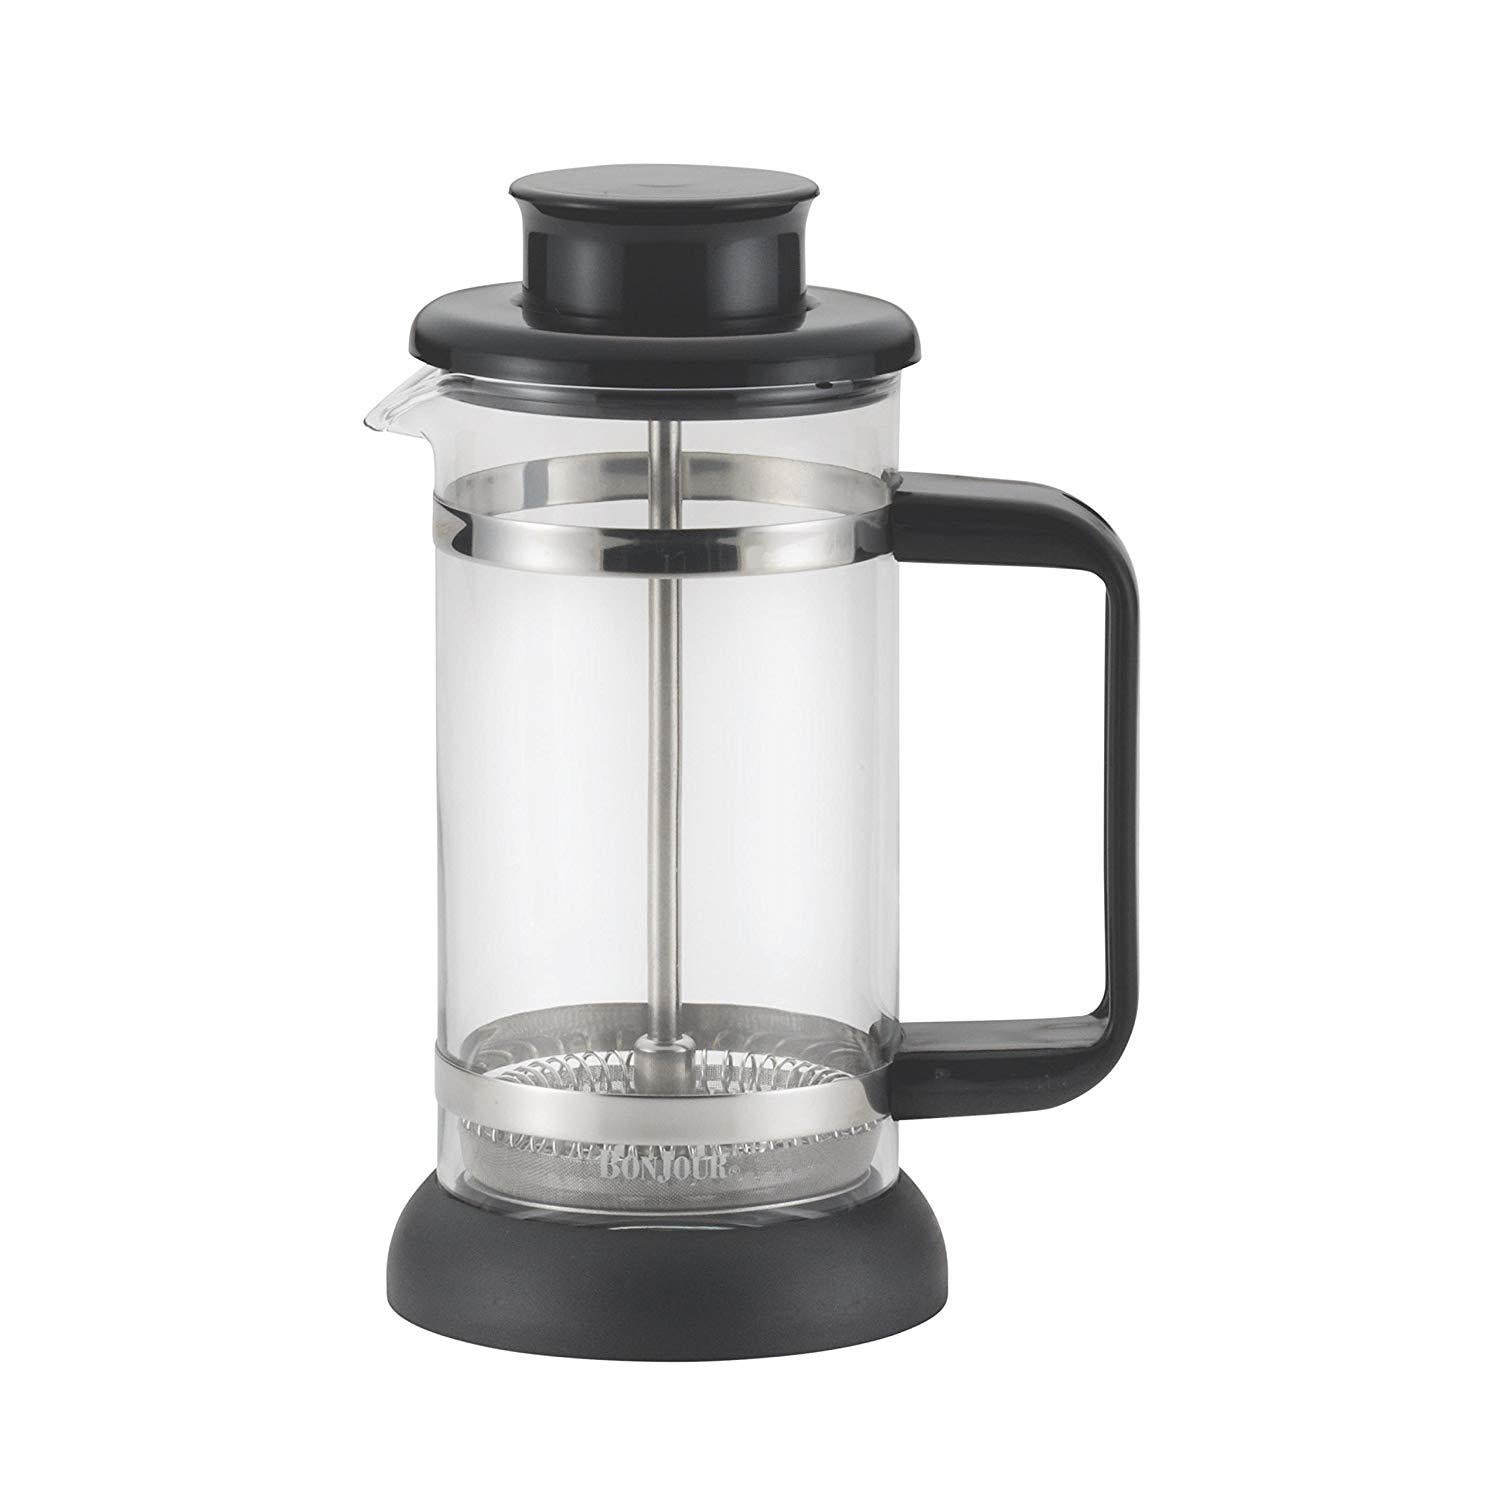 Bonjour 56467 Riviera French Press, 8 Cup